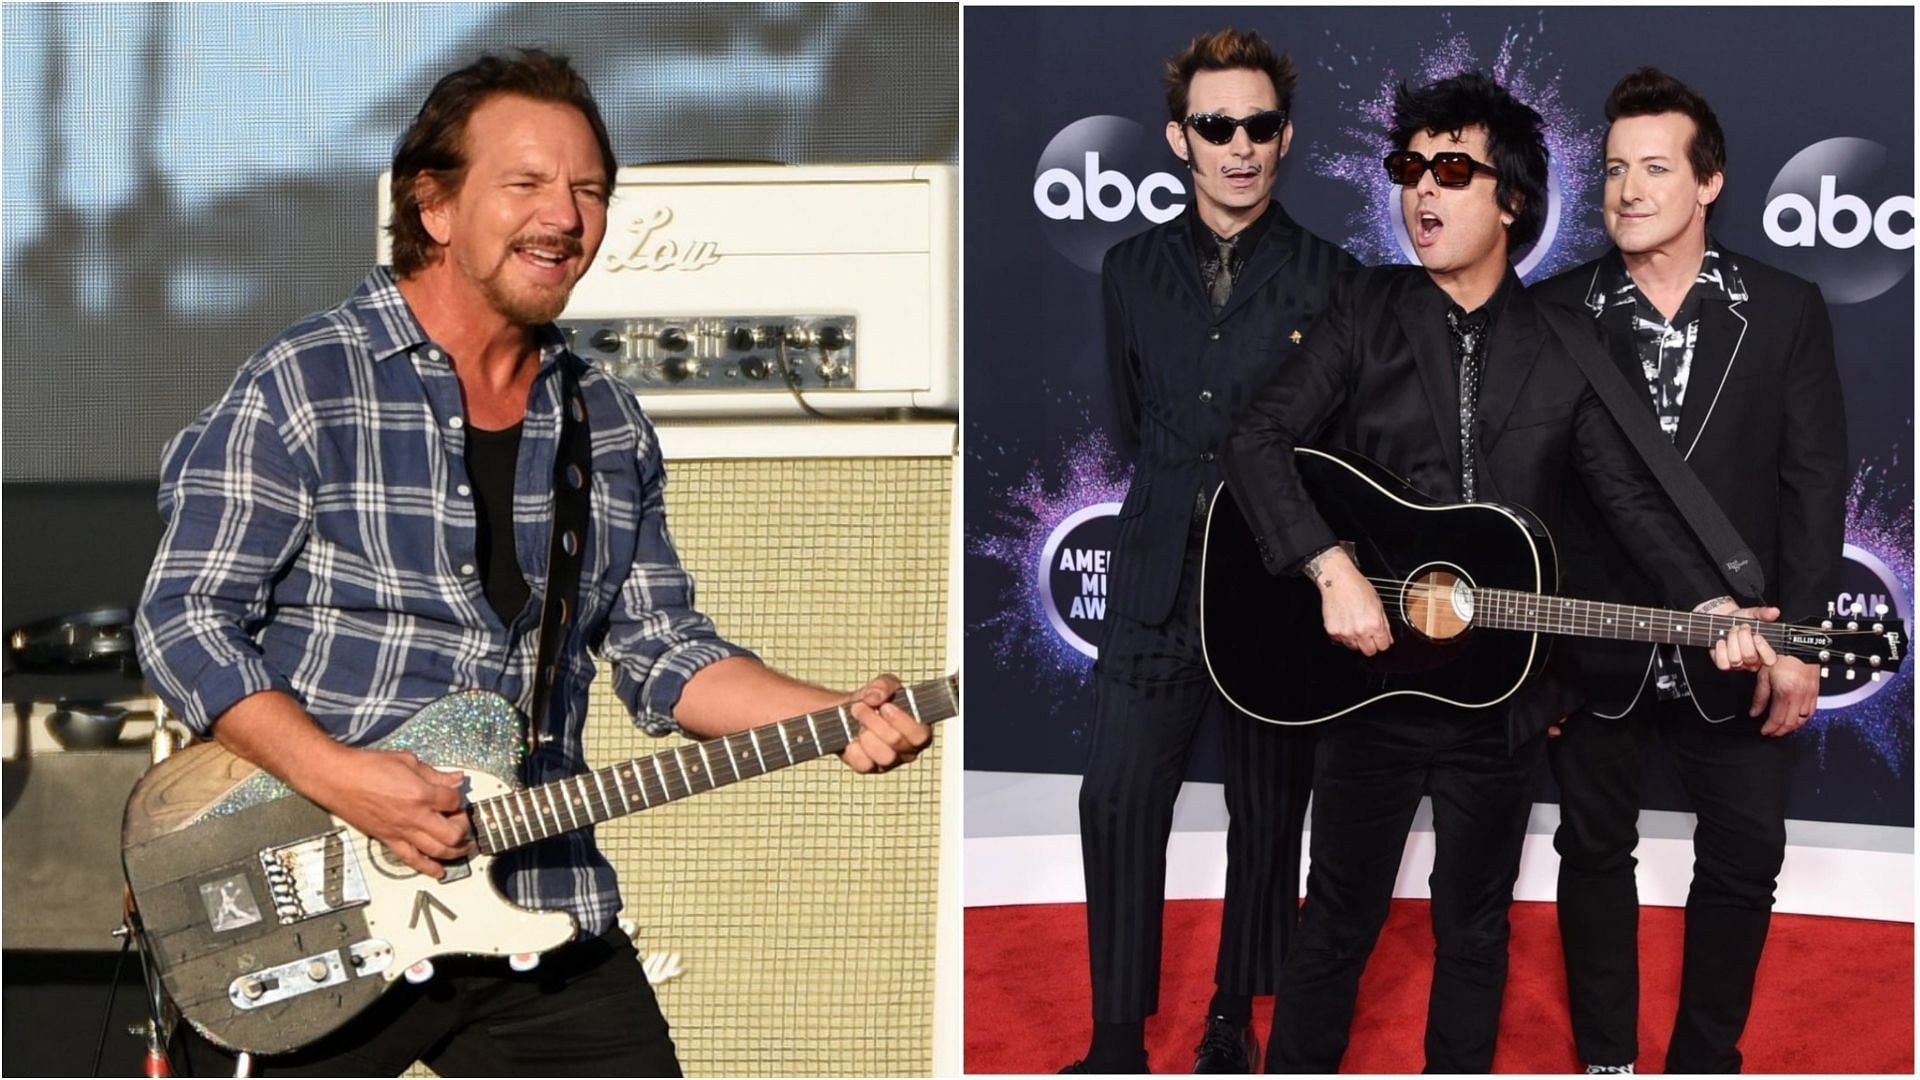 Eddie Vedder and Green Day are among the headliners for Innings festival for 2023. (Images via Getty)